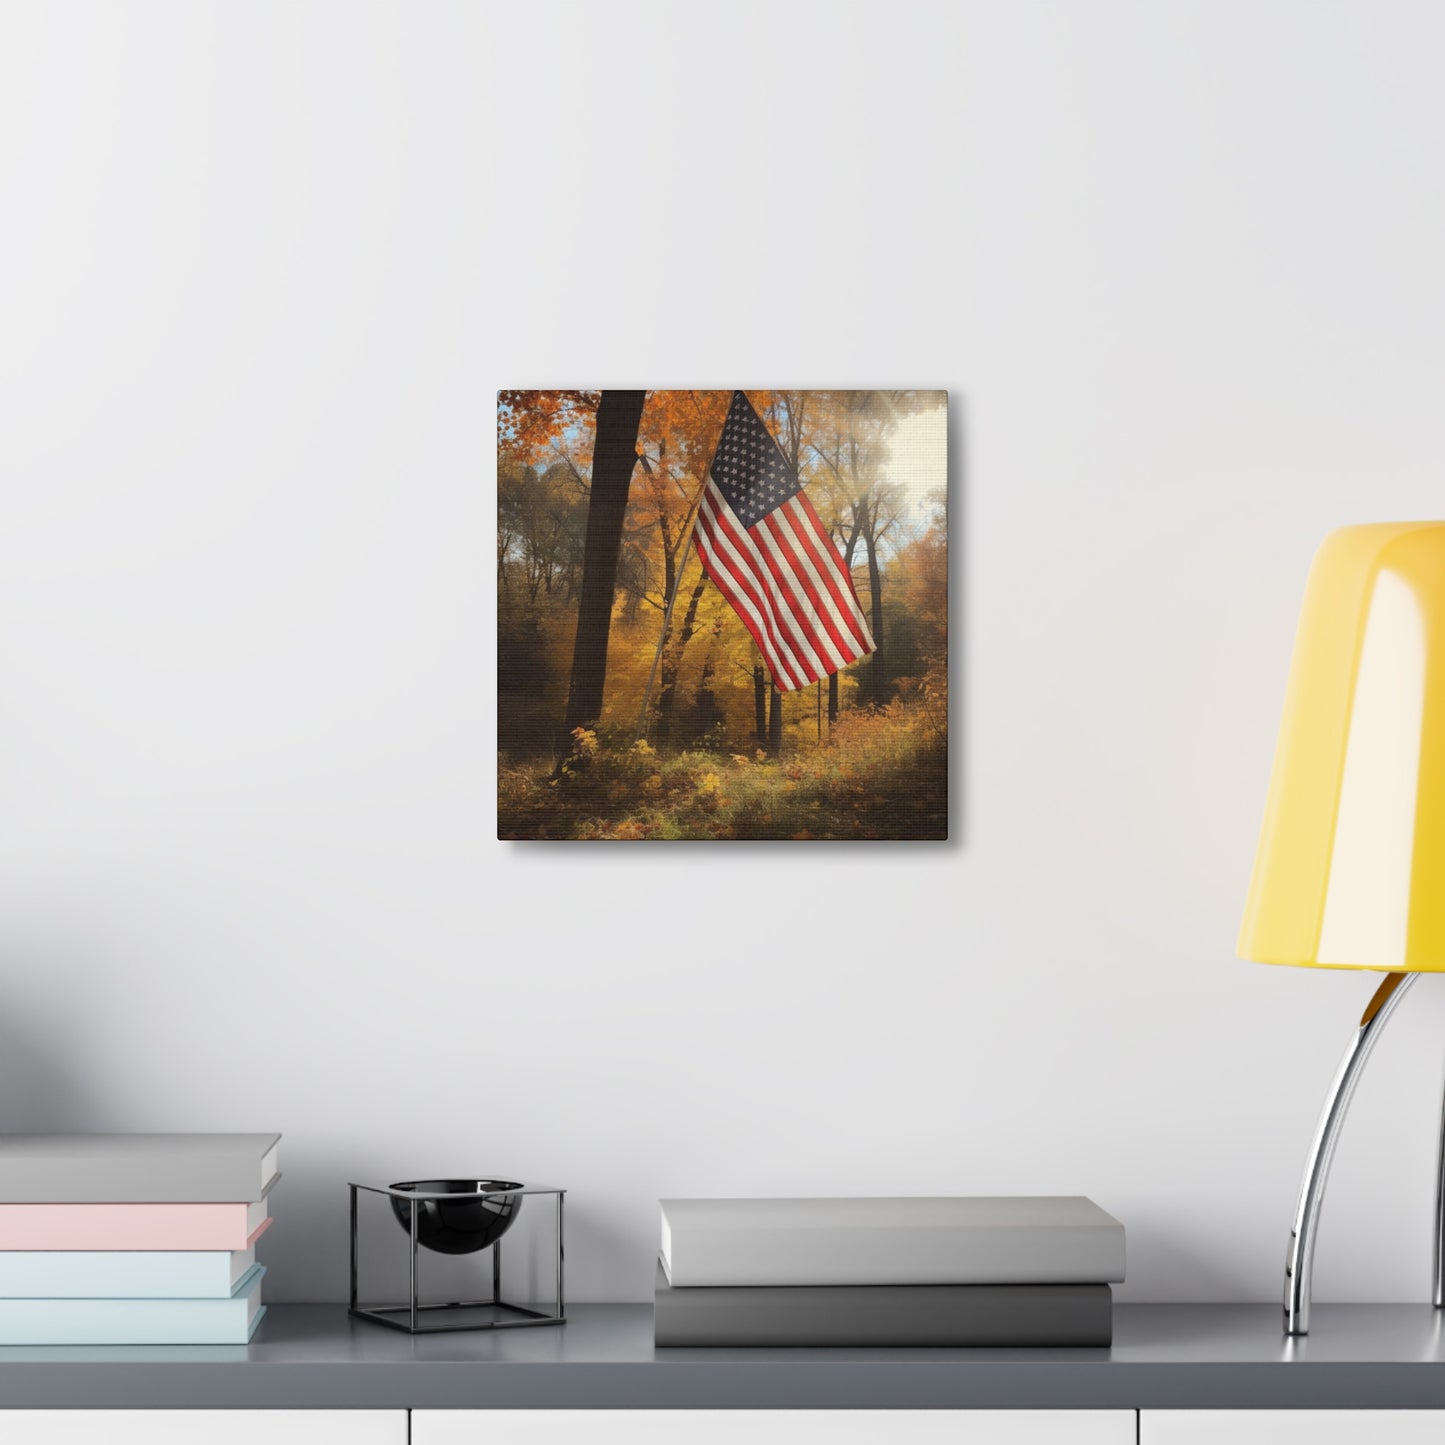 "American Flag In Autumn" Wall Art - Weave Got Gifts - Unique Gifts You Won’t Find Anywhere Else!